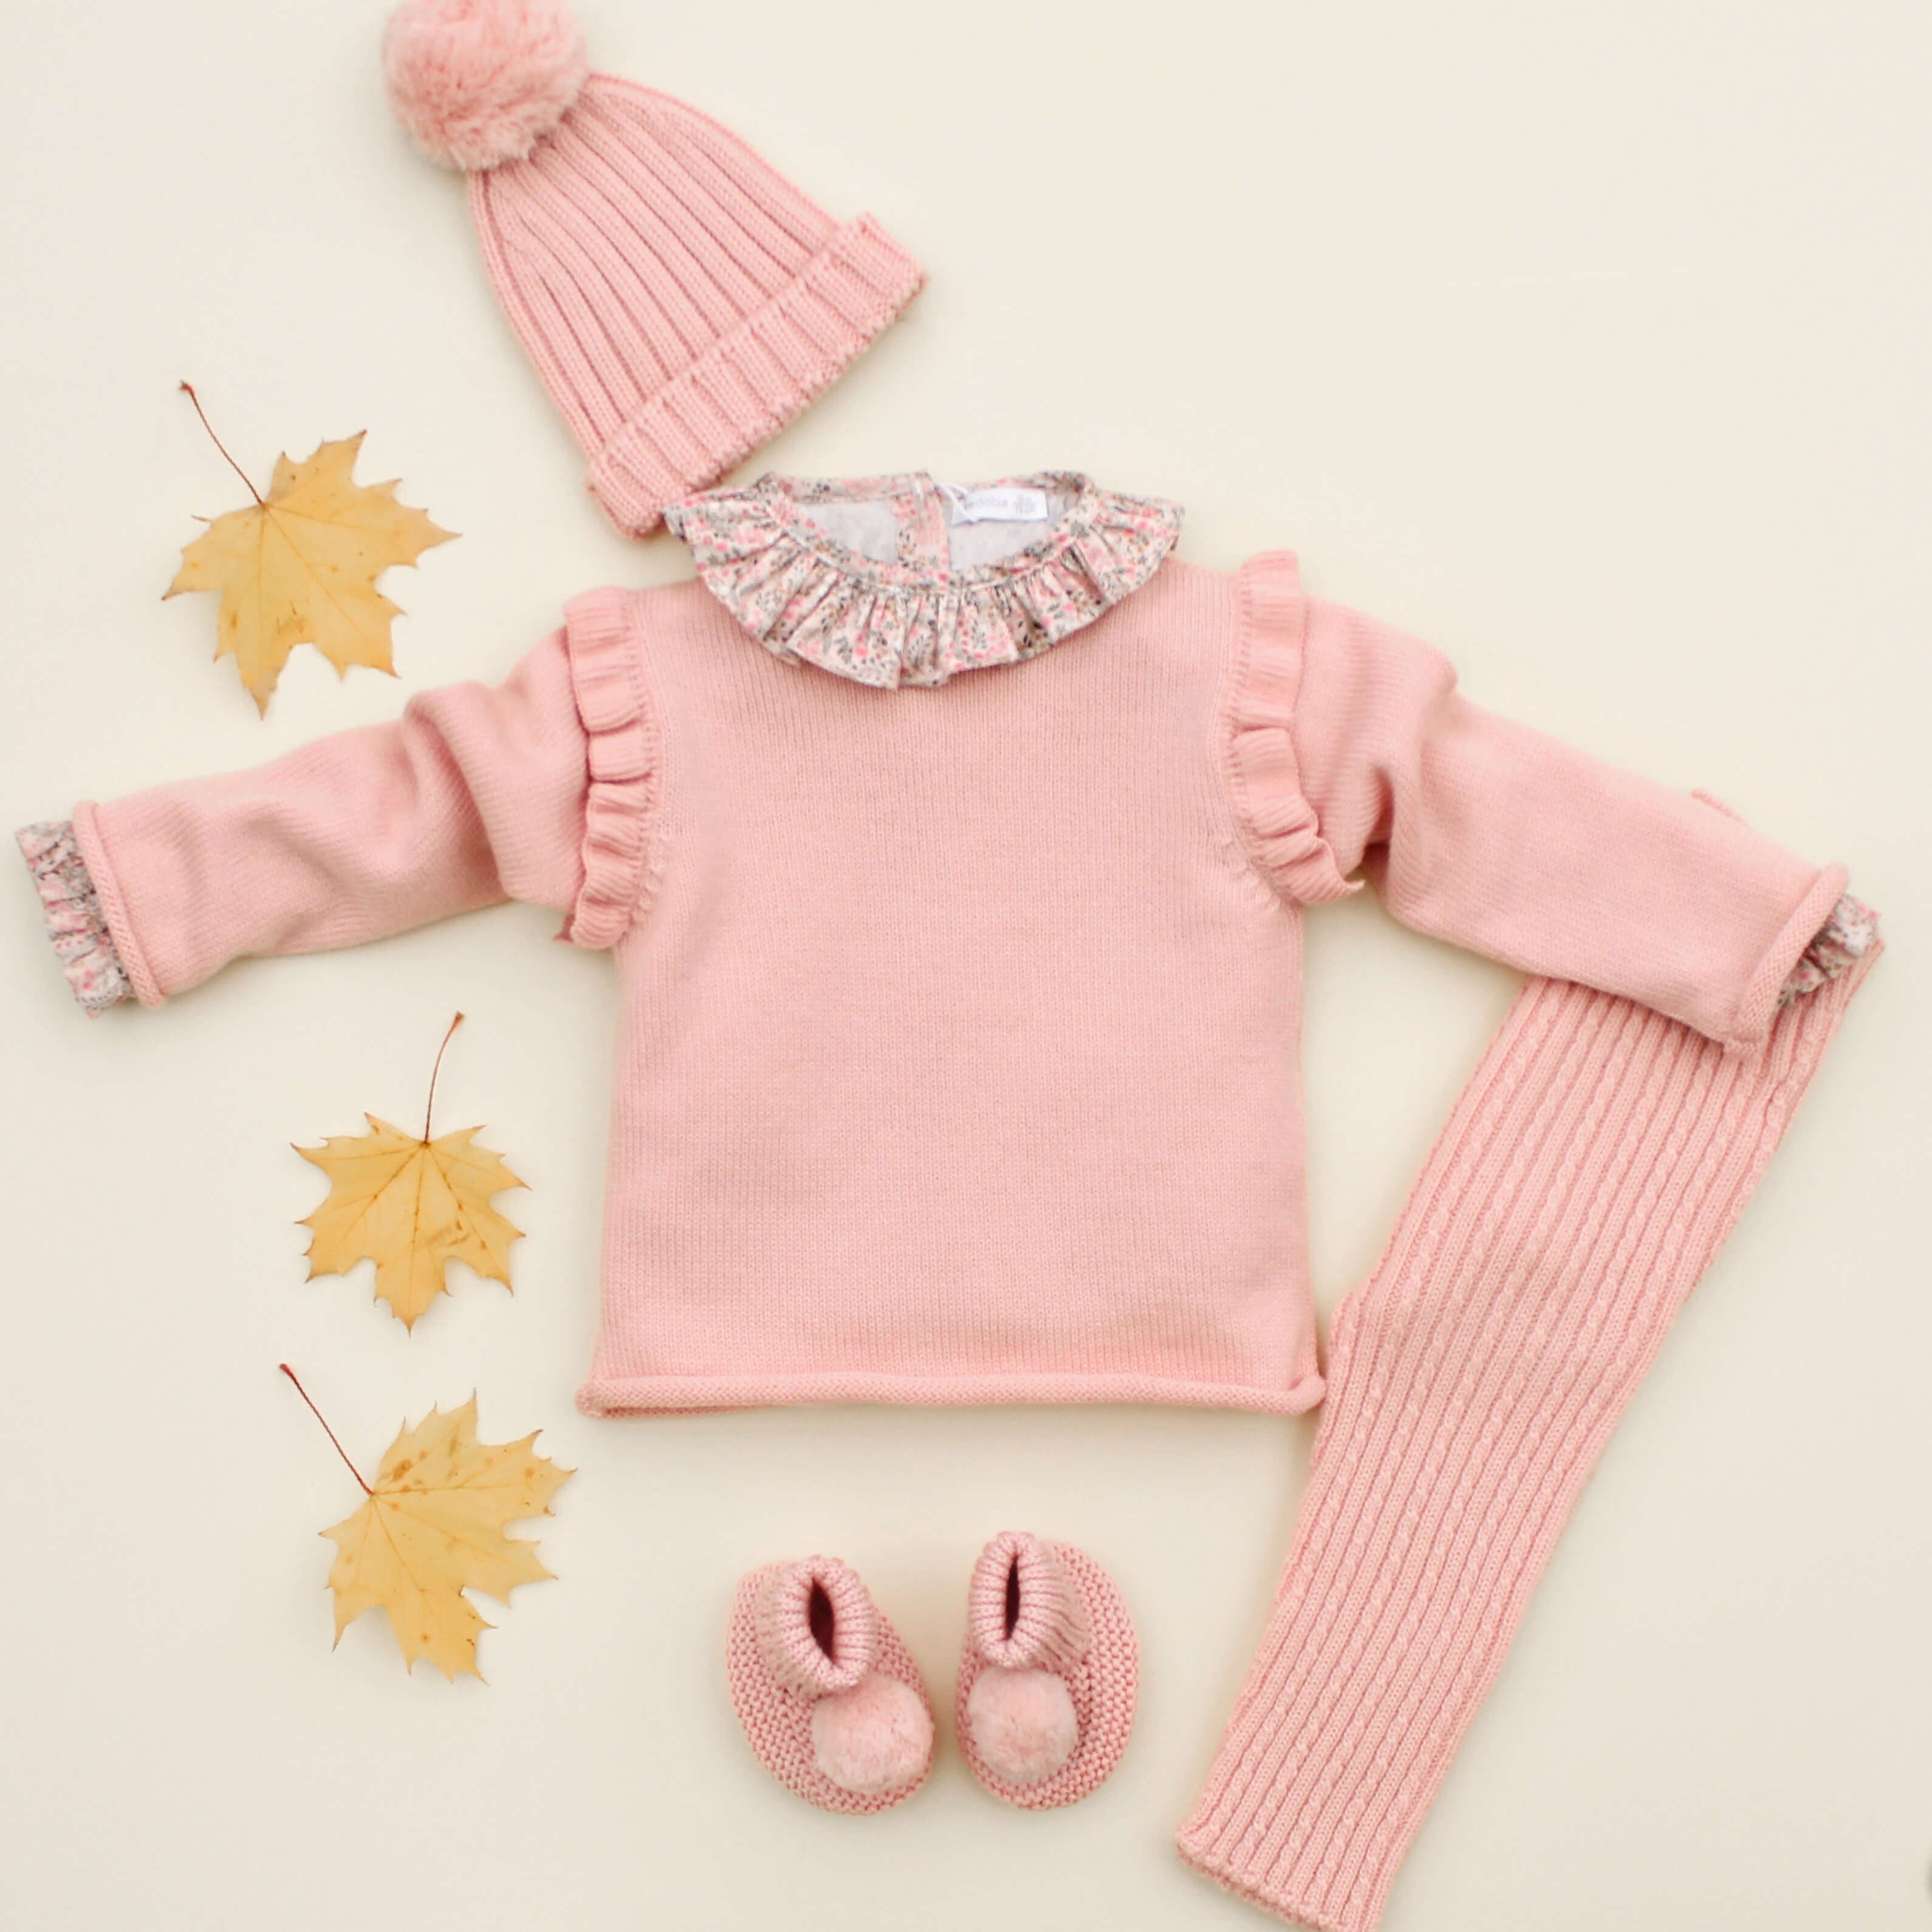 wedoble wool leggings and sweater in pink